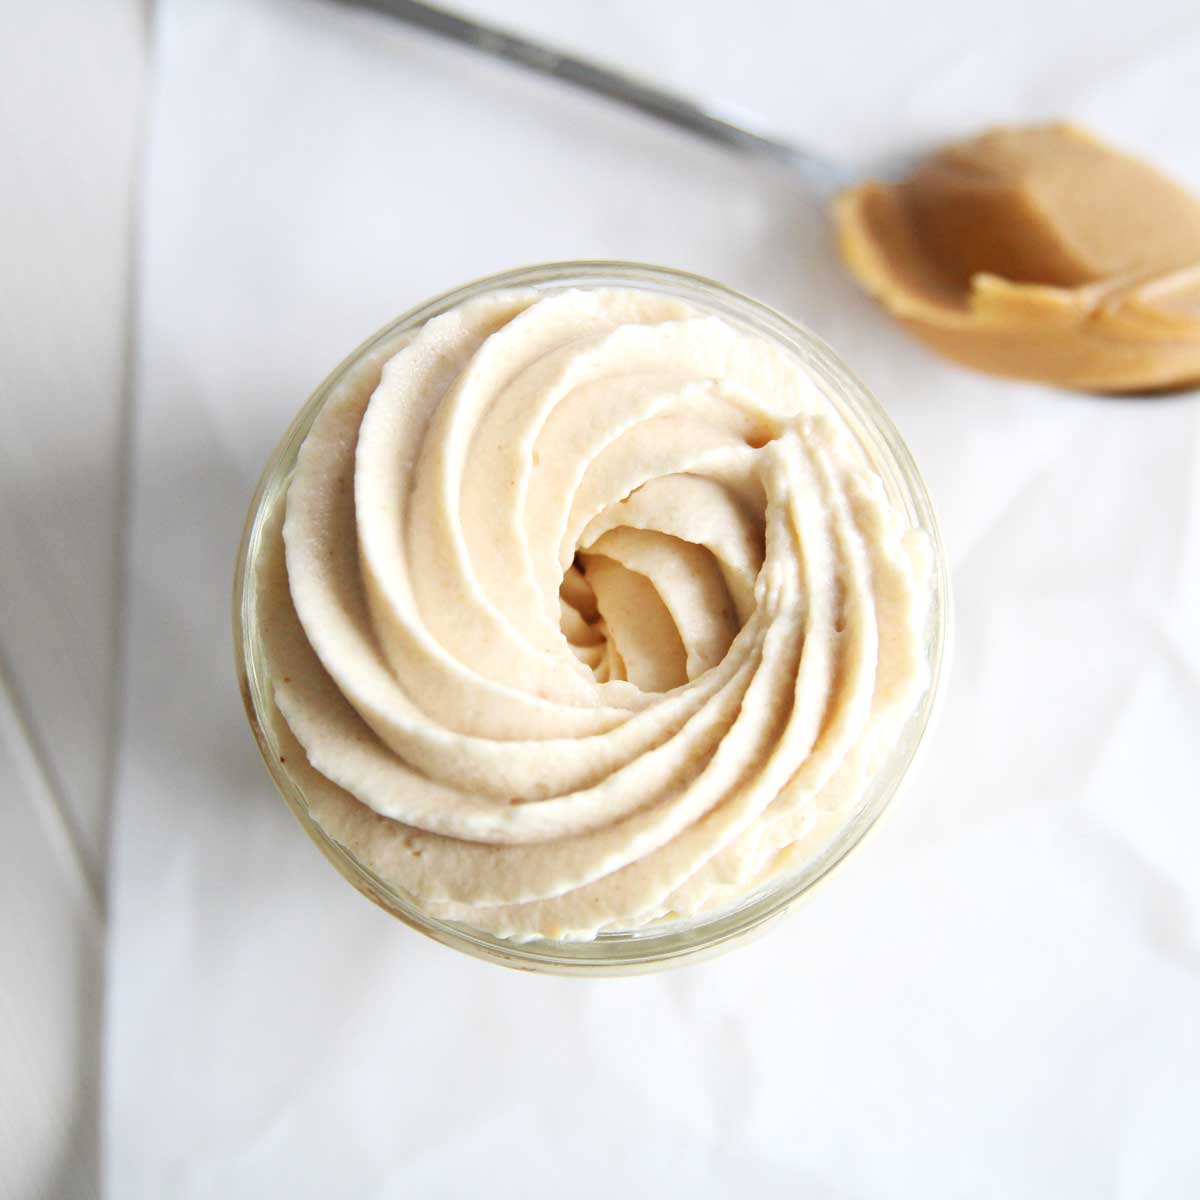 Peanut Butter Whipped Cream Recipe That Tastes Like Reeses Desserts - Peanut Butter Scones